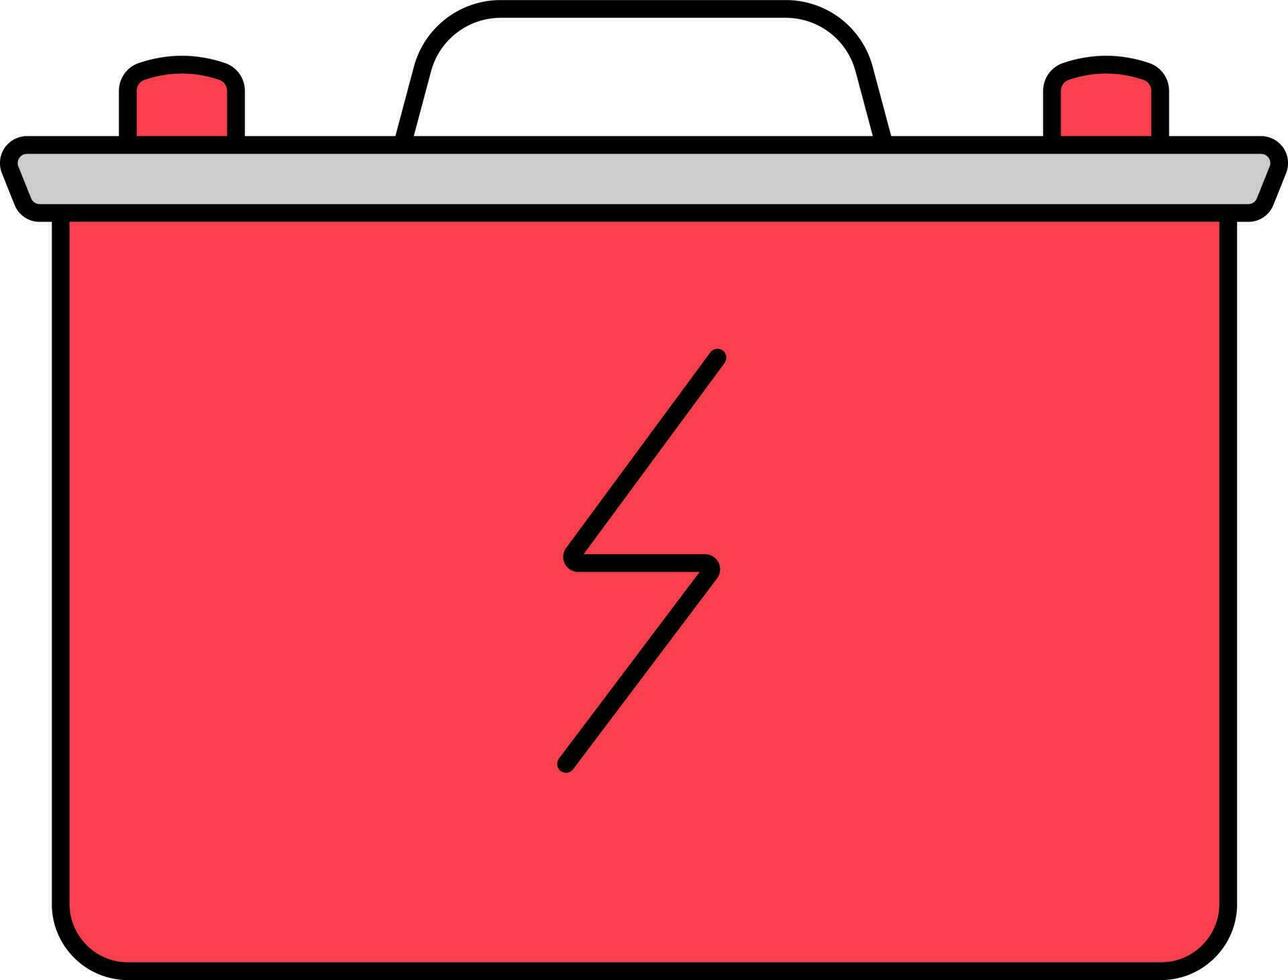 Tubular Battery Icon In Grey And Red Color. vector